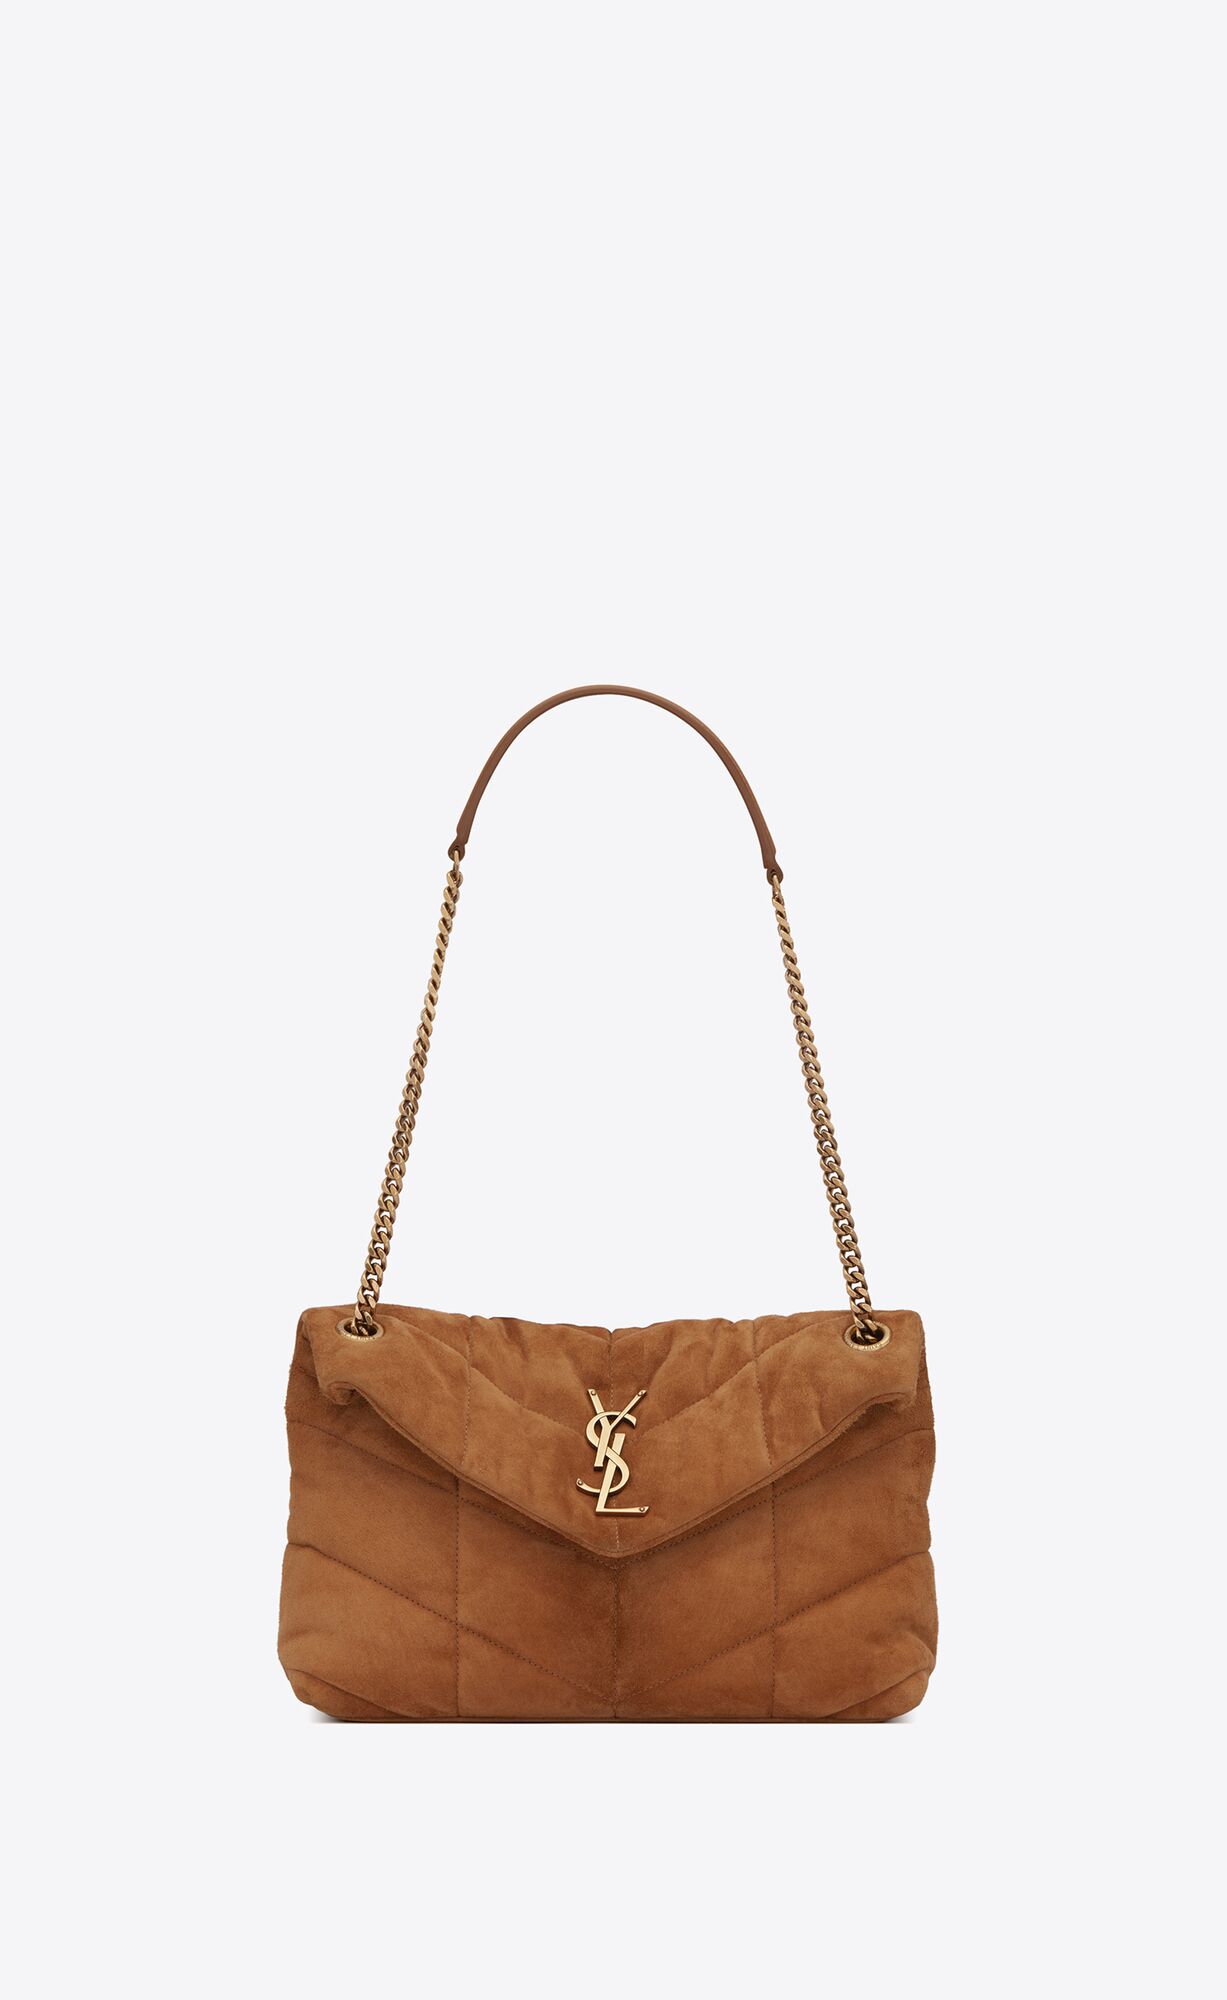 Saint Laurent Puffer Small Bag In Quilted Suede – Cinnamon – 5774761U8377761